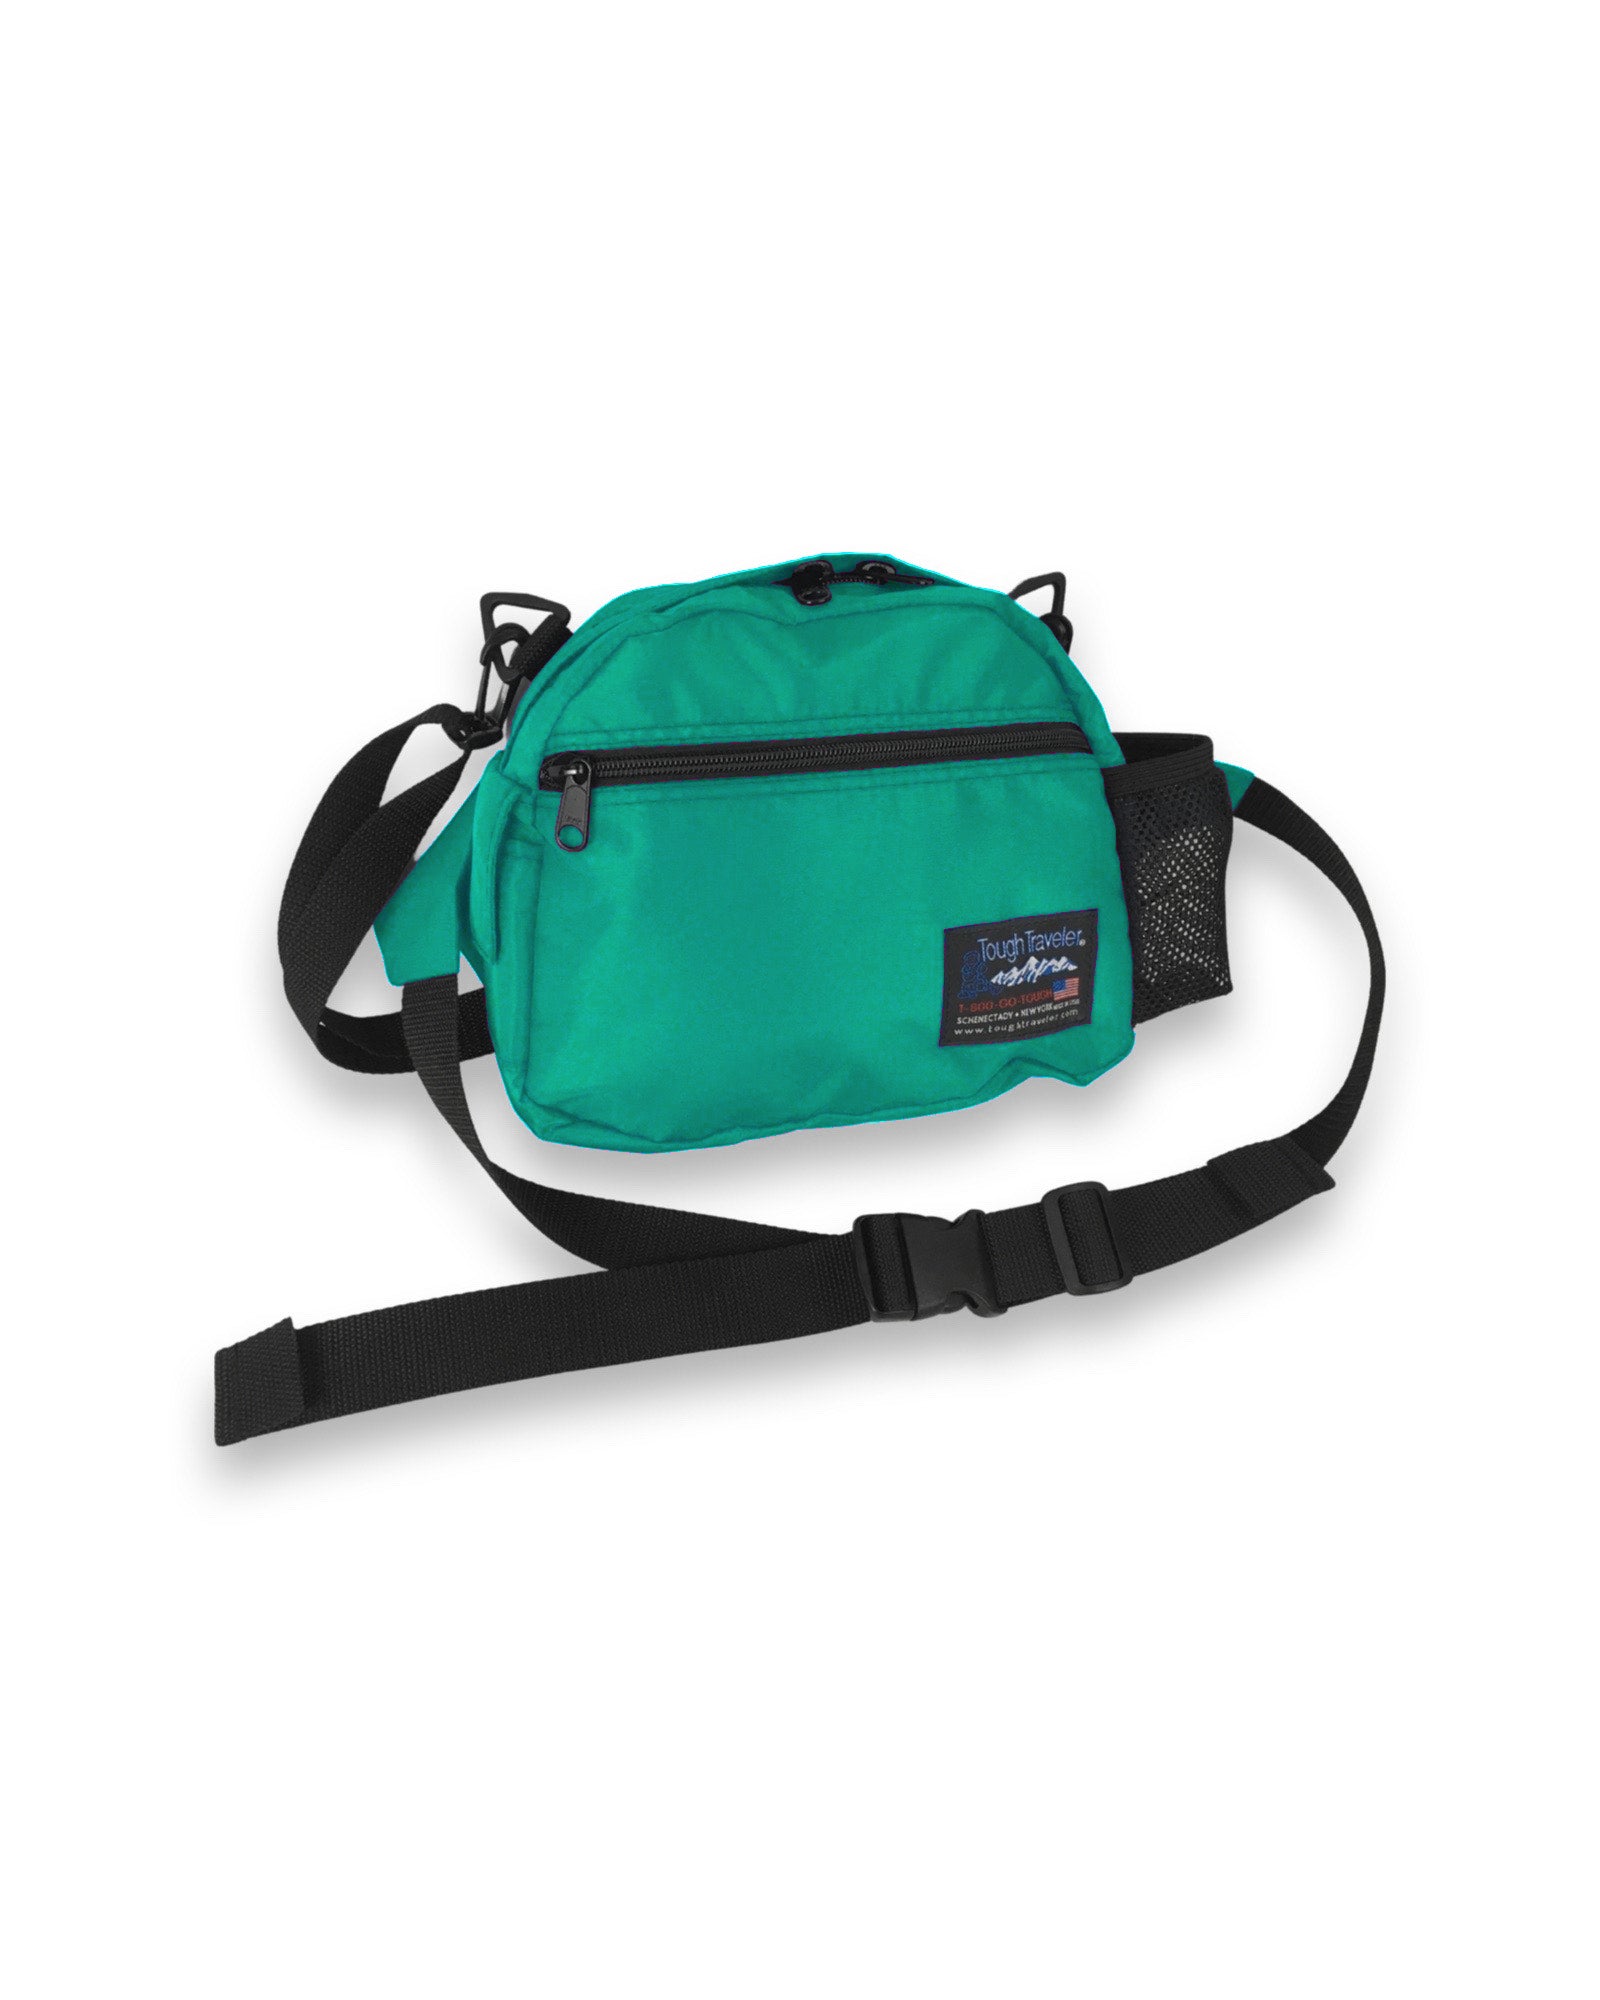 Outdoor Products Marilyn Waist Pack Crossbody Sling Fanny Travel Bag Teal  Green